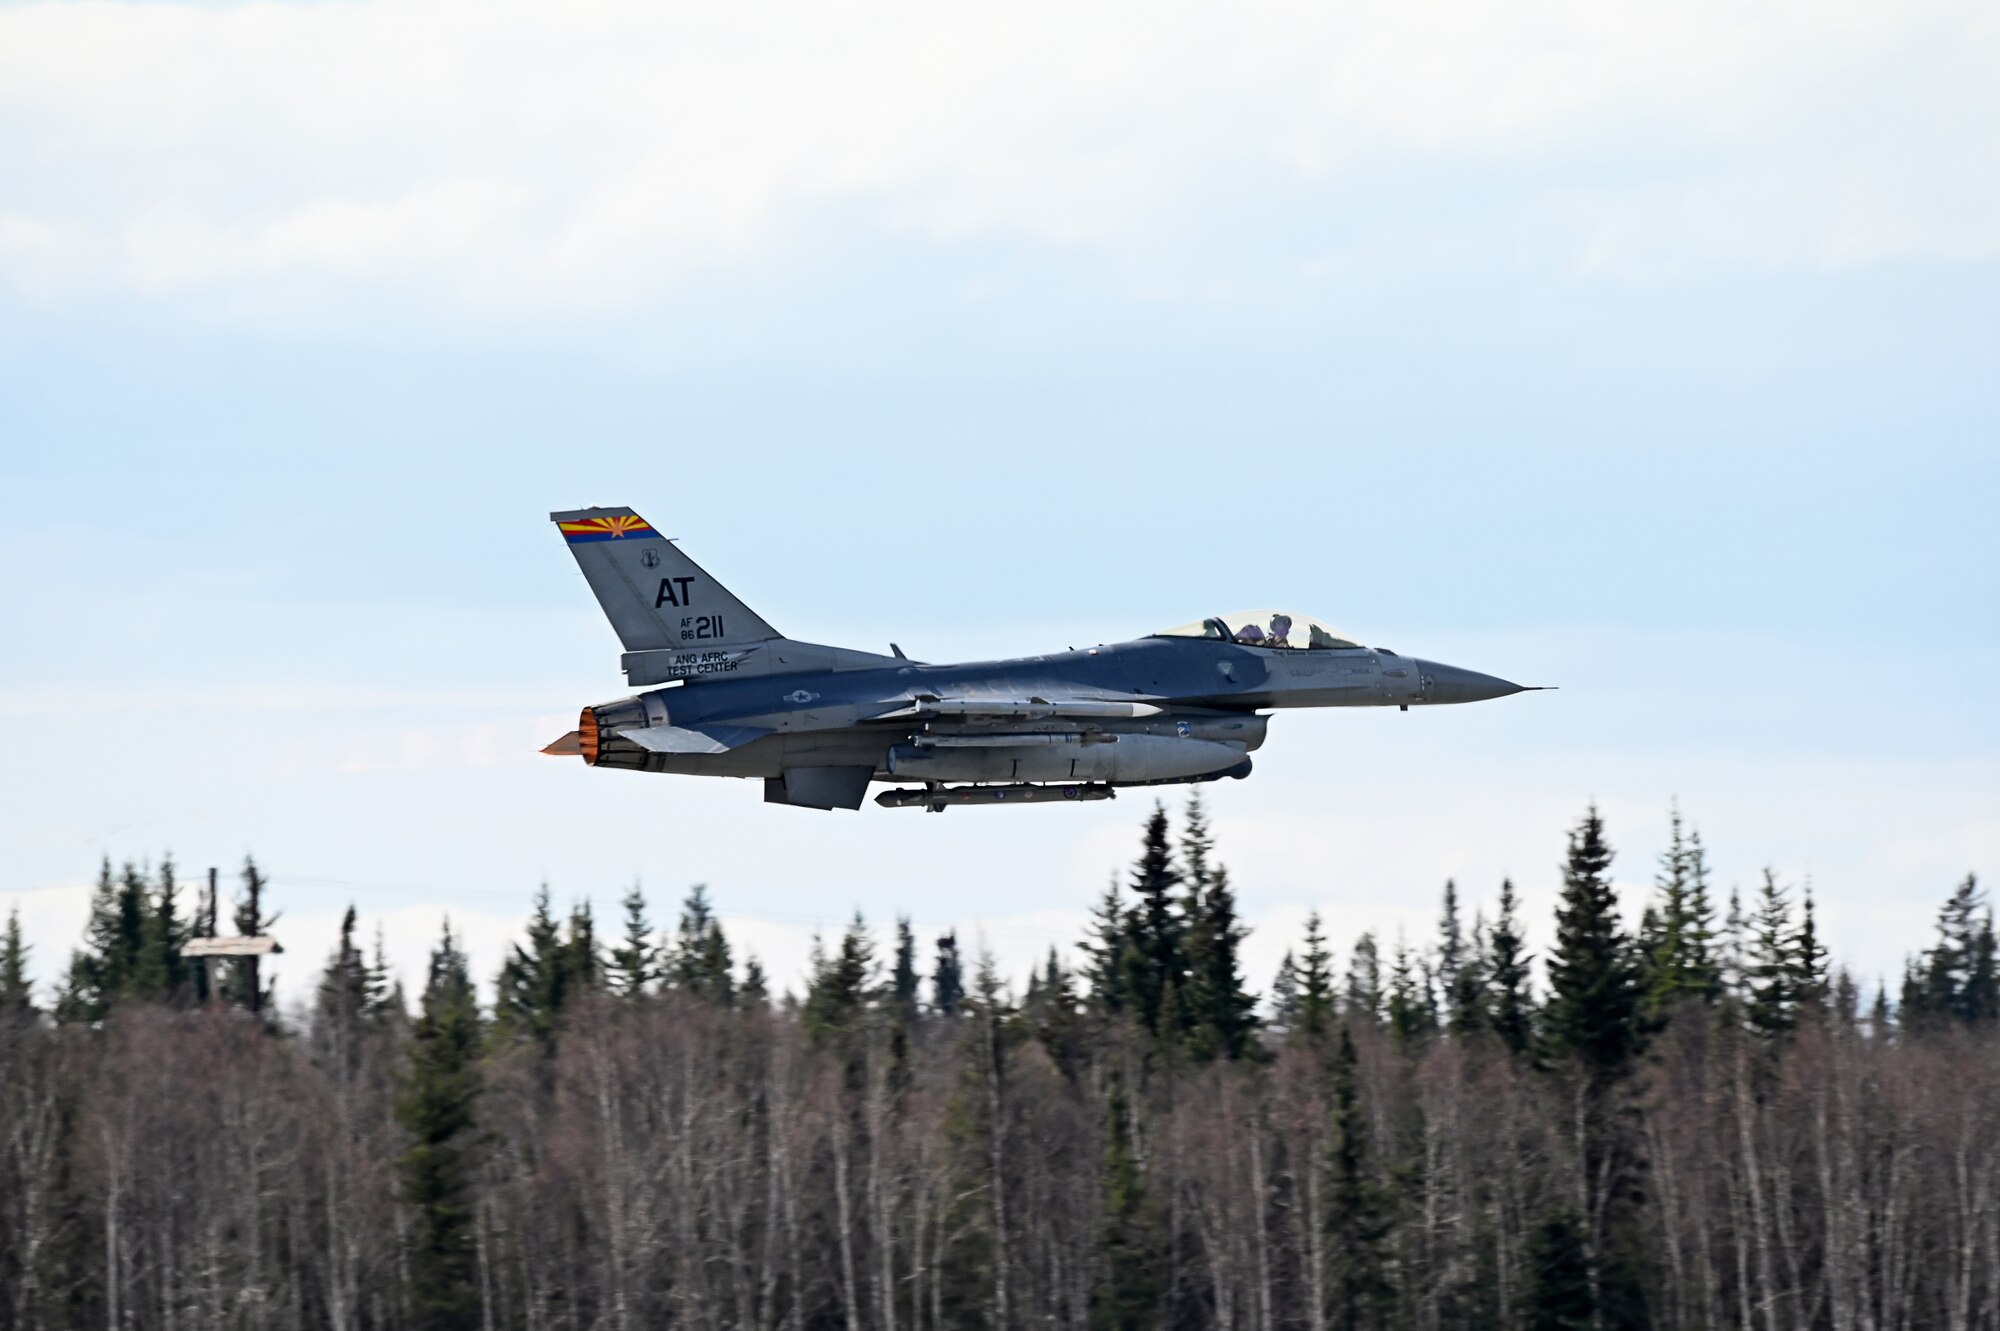 An F-16 Fighting Falcon assigned to the Air National Guard Air Force Reserve Command Test Center launches at Eielsen Air Force Base, Alaska, May 9, 2023, during Northern Edge 2023. AATC aircraft tested the “angry kitten” combat pod, an electronic warfare countermeasure that can be housed in removable, adaptable pods under aircraft wings or fuselages.